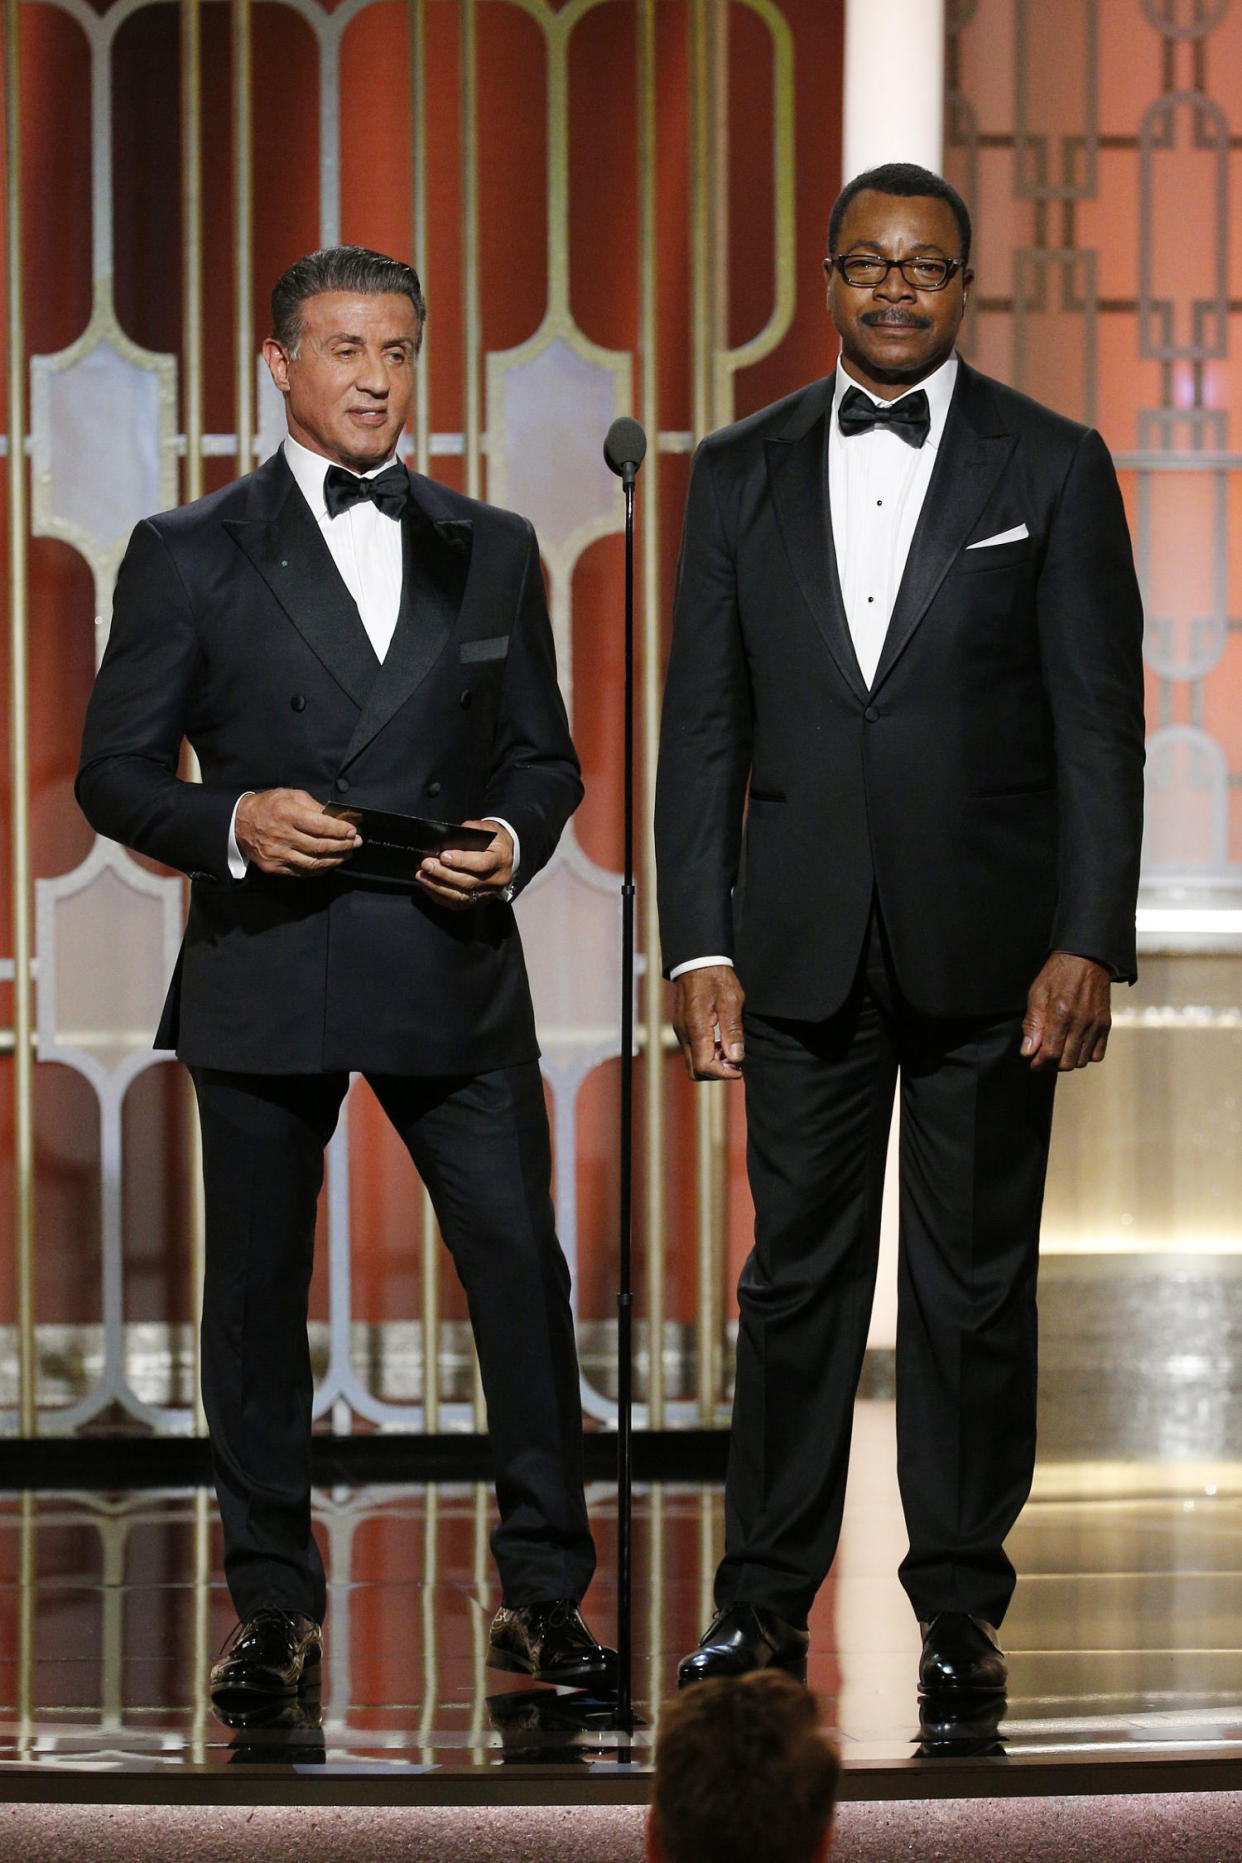 Sylvester Stallone and Carl Weathers, who co-starred in the 1977 Golden Globe Award-winning film 